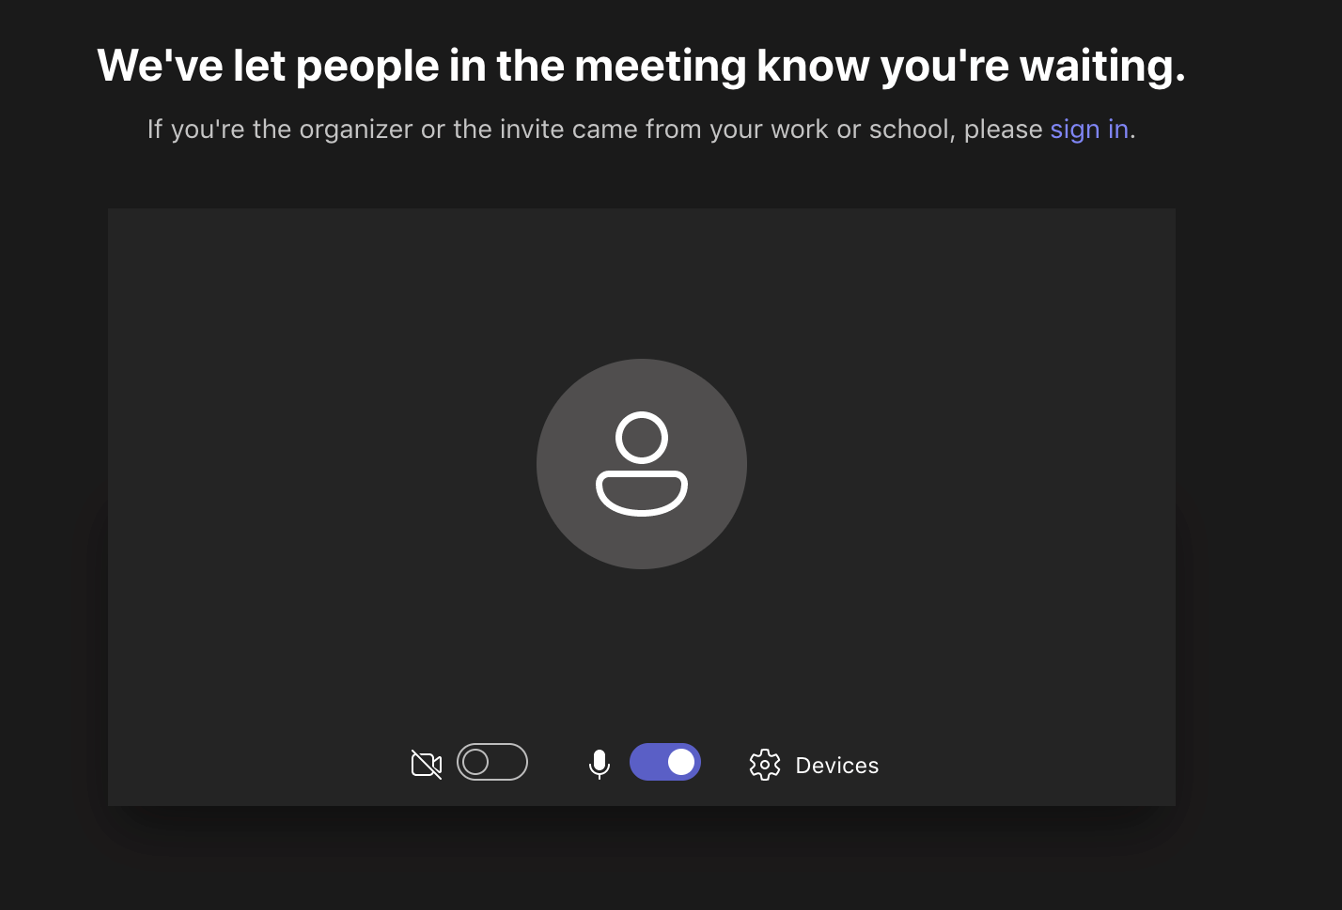 image showing you waiting to be let in by the moderator